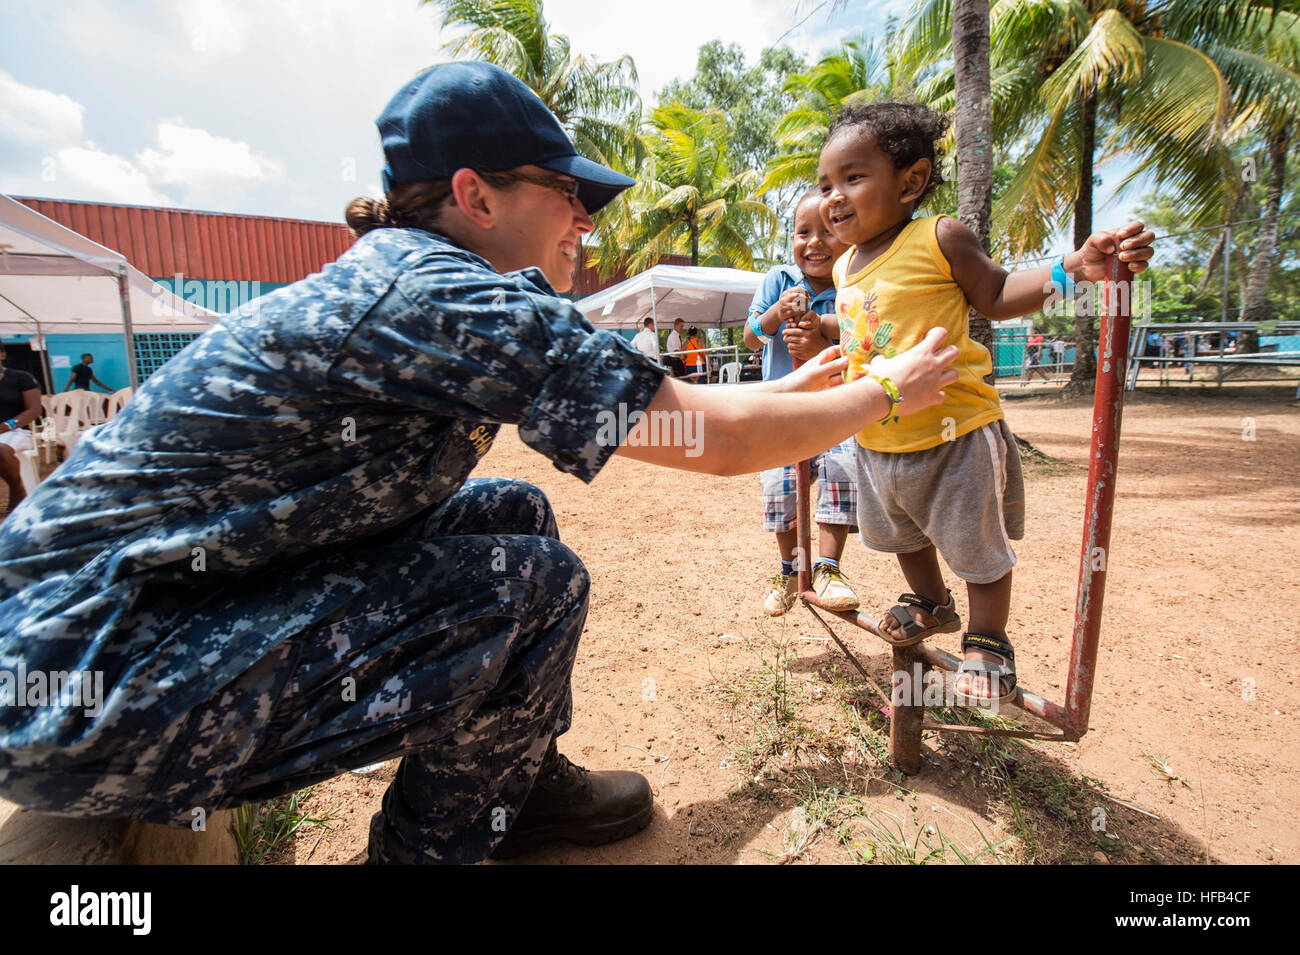 150521-N-PD309-128 PUERTO CABEZAS, Nicaragua (May 21, 2015) Lt. Cmdr. Heather Shattuck, assigned to Fort Belvoir Community Hospital, Va., plays with children at a medical site established at the Colegio Moravo Juan Amos Comenius during Continuing Promise 2015. Continuing Promise is a U.S. Southern Command-sponsored and U.S. Naval Forces Southern Command/U.S. 4th Fleet-conducted deployment to conduct civil-military operations including humanitarian-civil assistance, subject matter expert exchanges, medical, dental, veterinary and engineering support and disaster response to partner nations and  Stock Photo